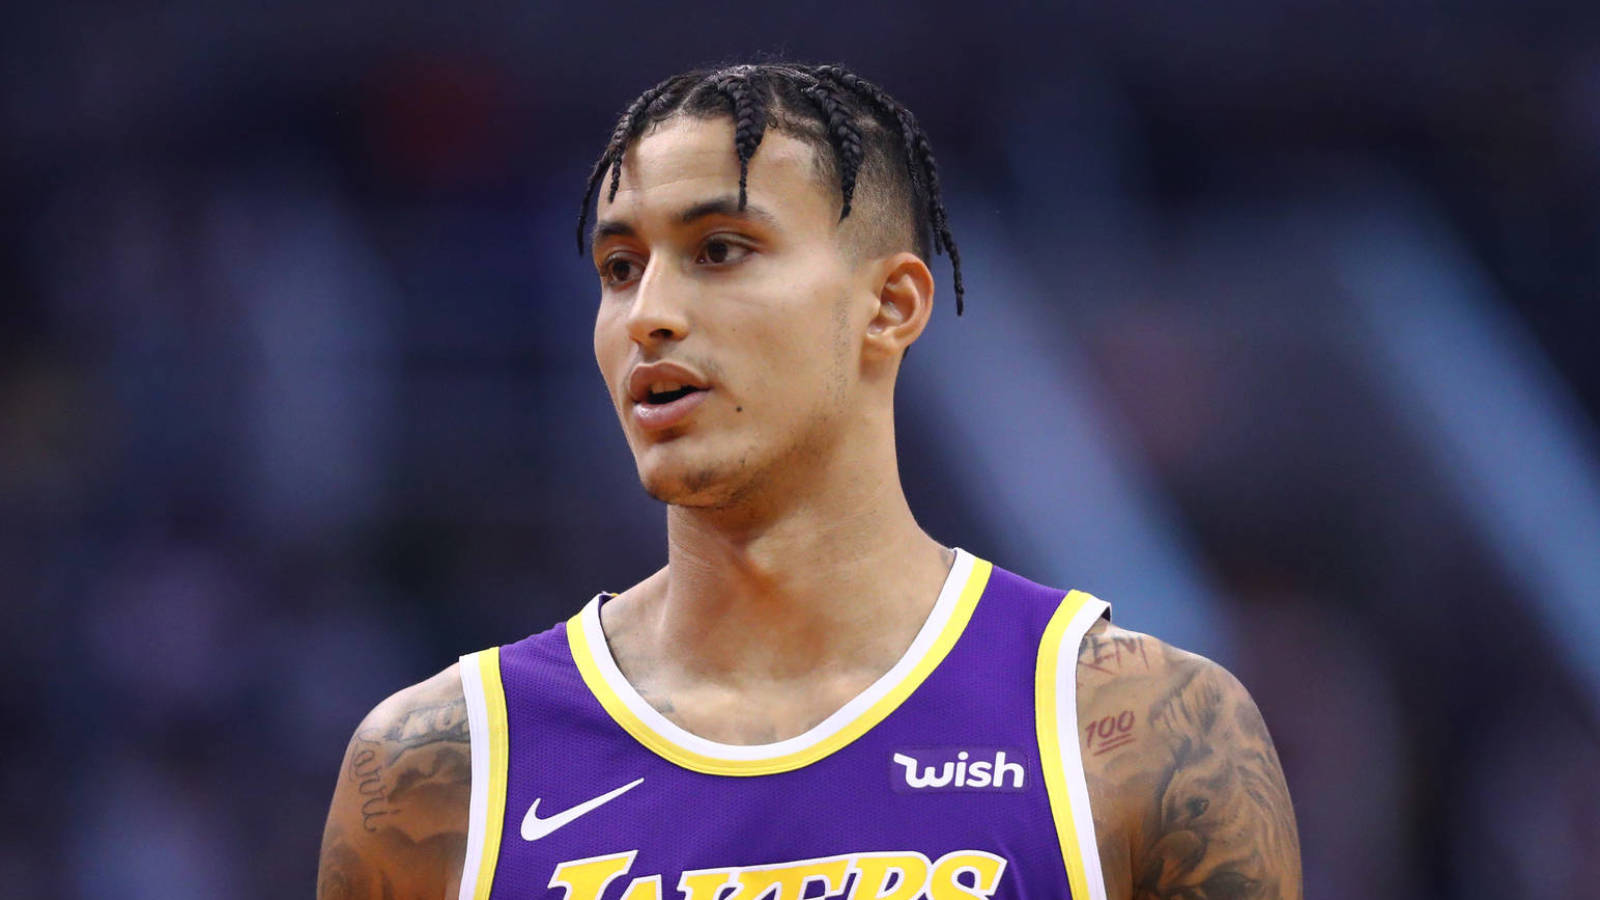 Watch: Lakers roast Kyle Kuzma for wild Christmas outfit and haircut.